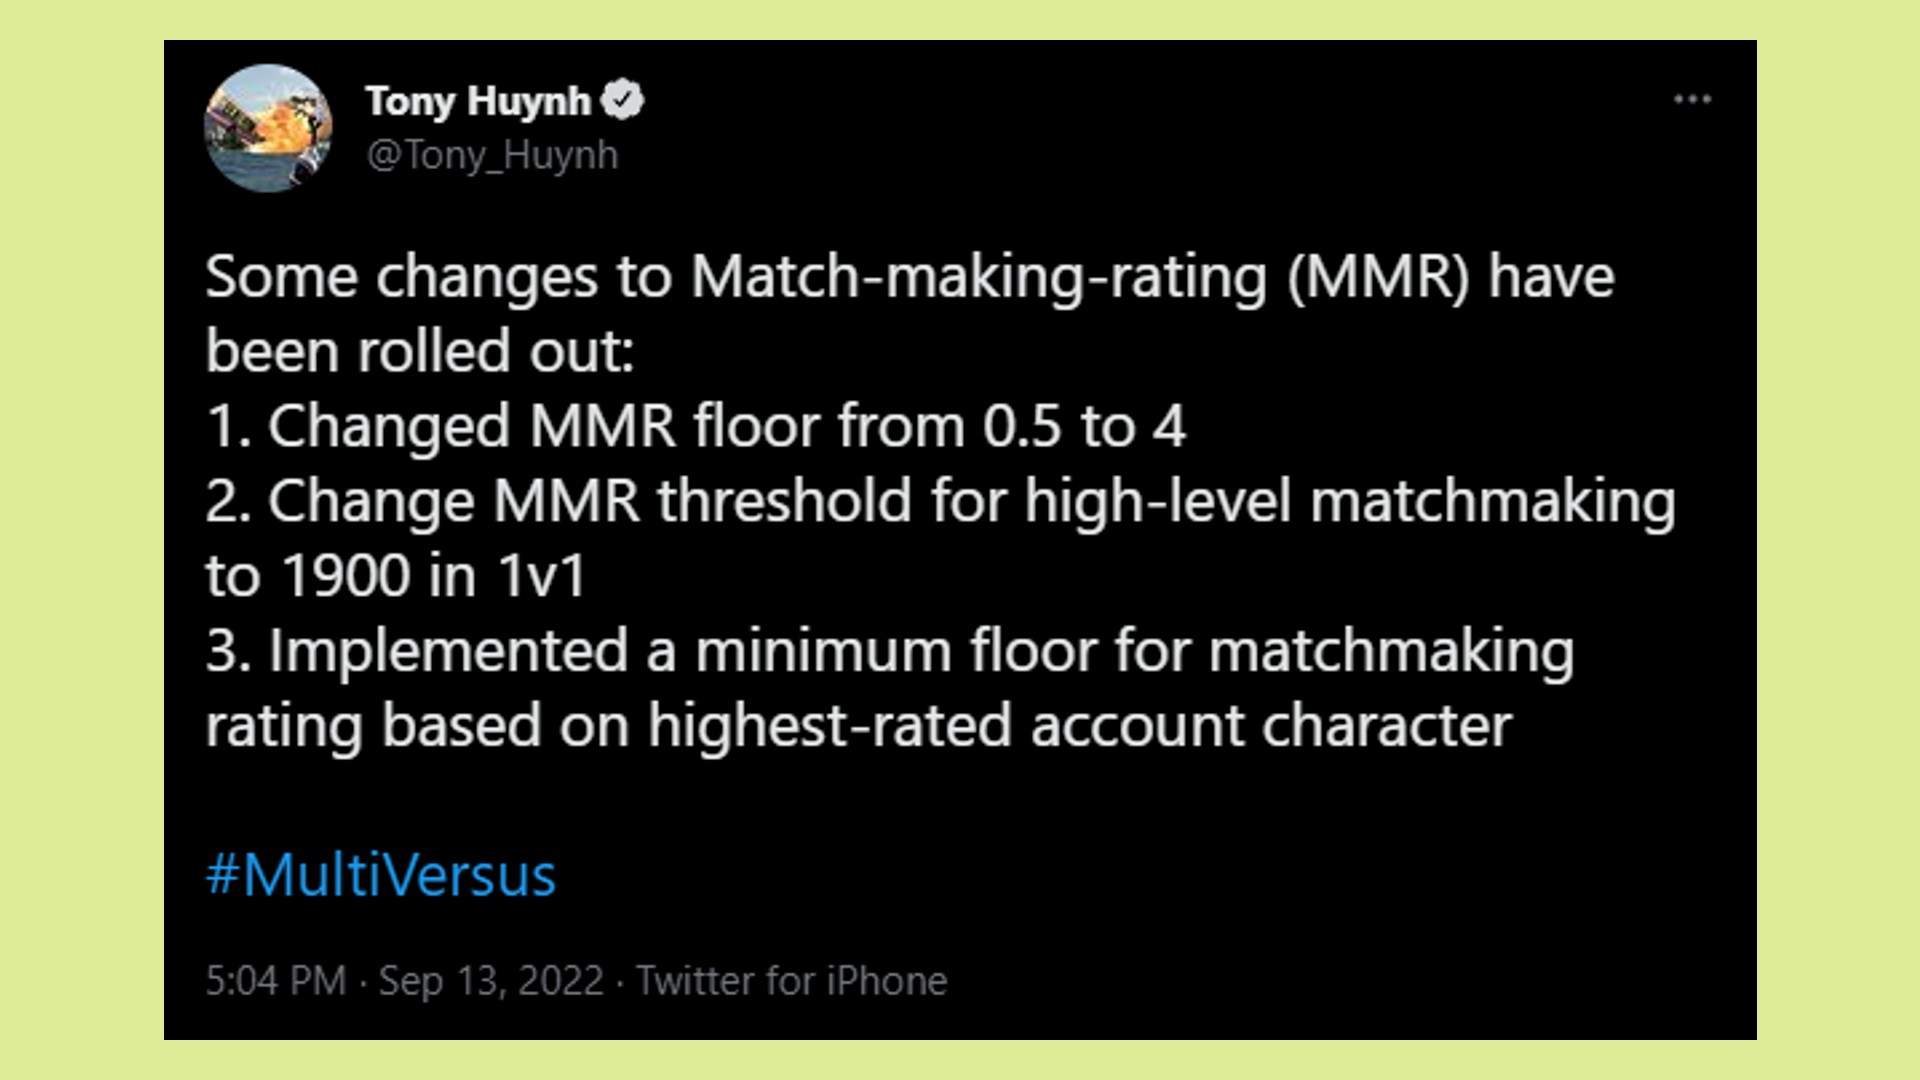 Changes in match making rating (MMR) and number of games played